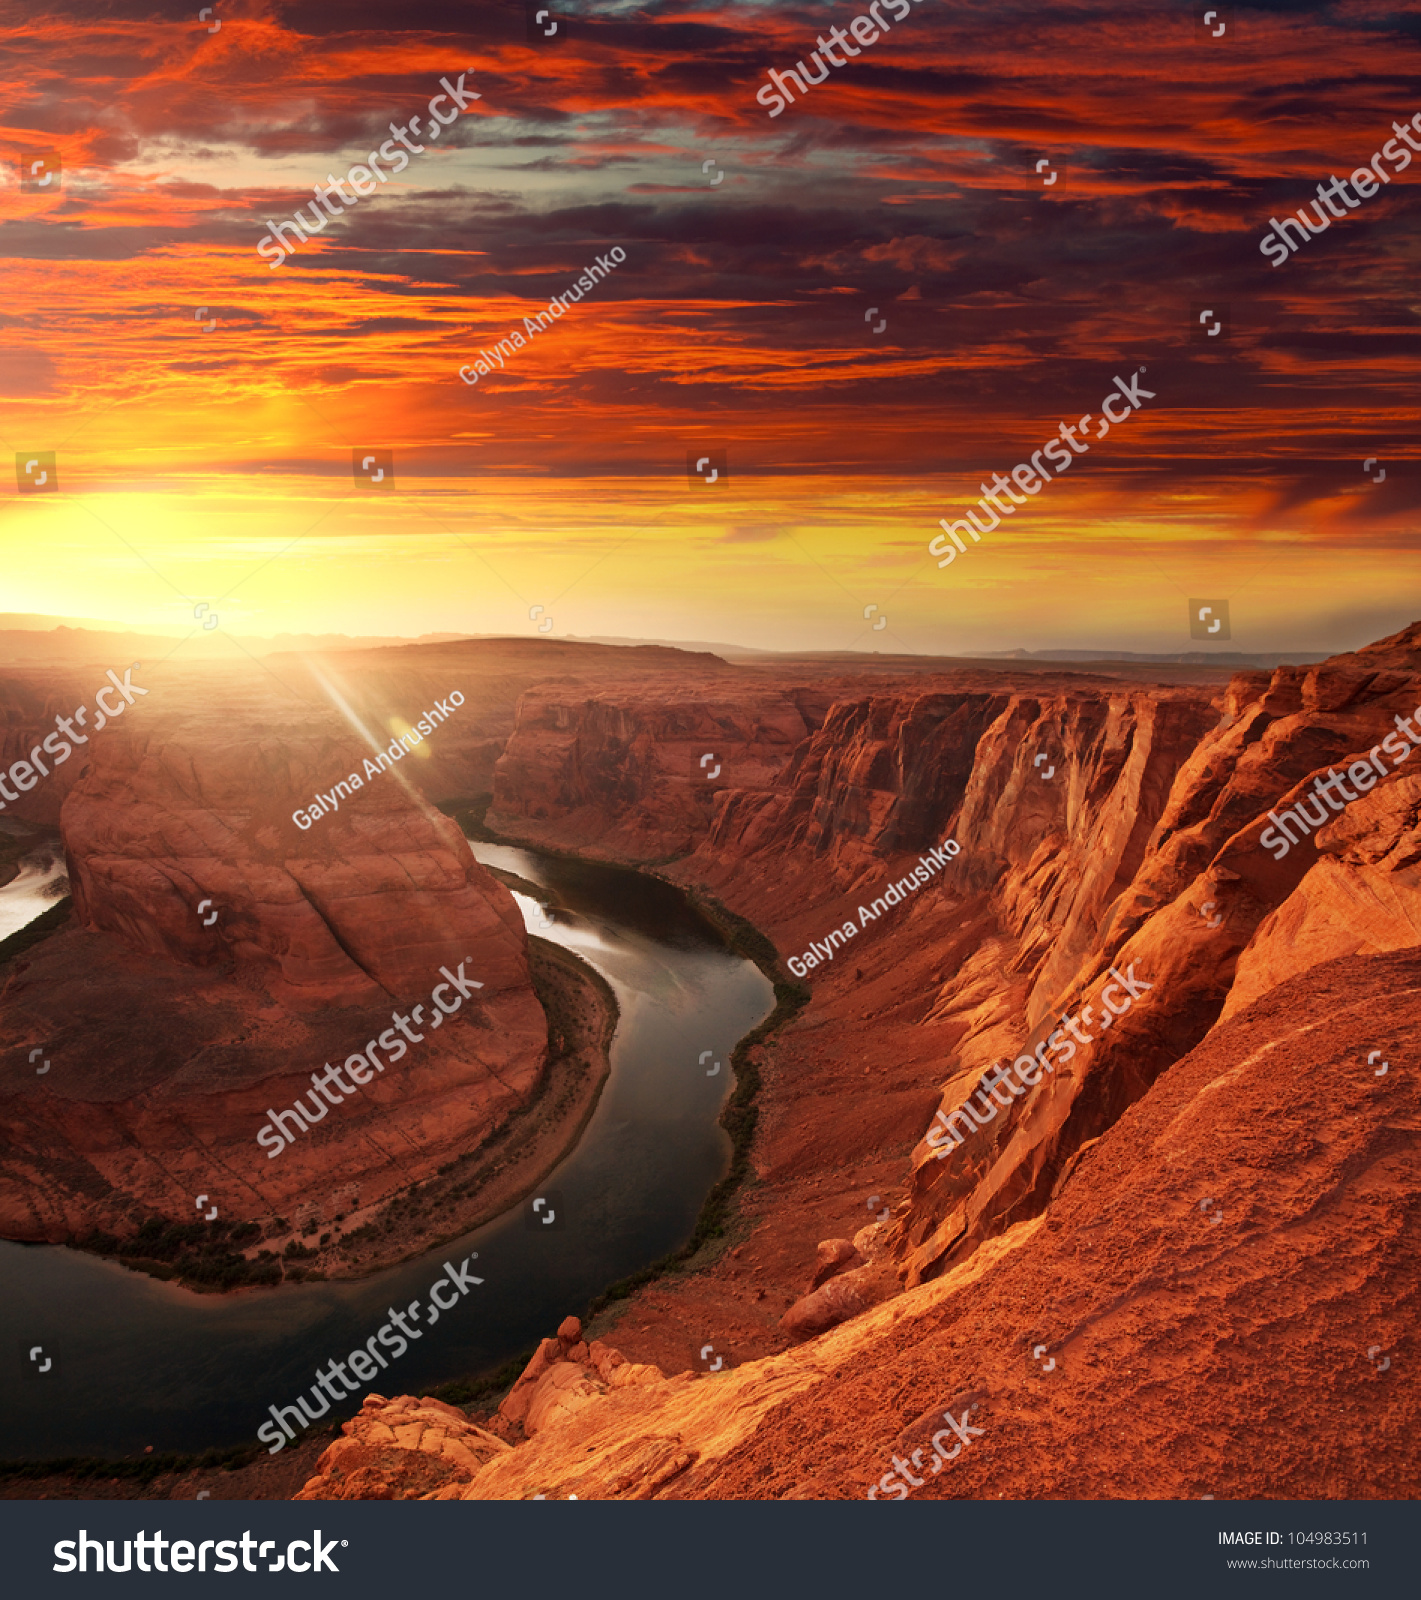 Horse Shoe Bend at sunset #104983511